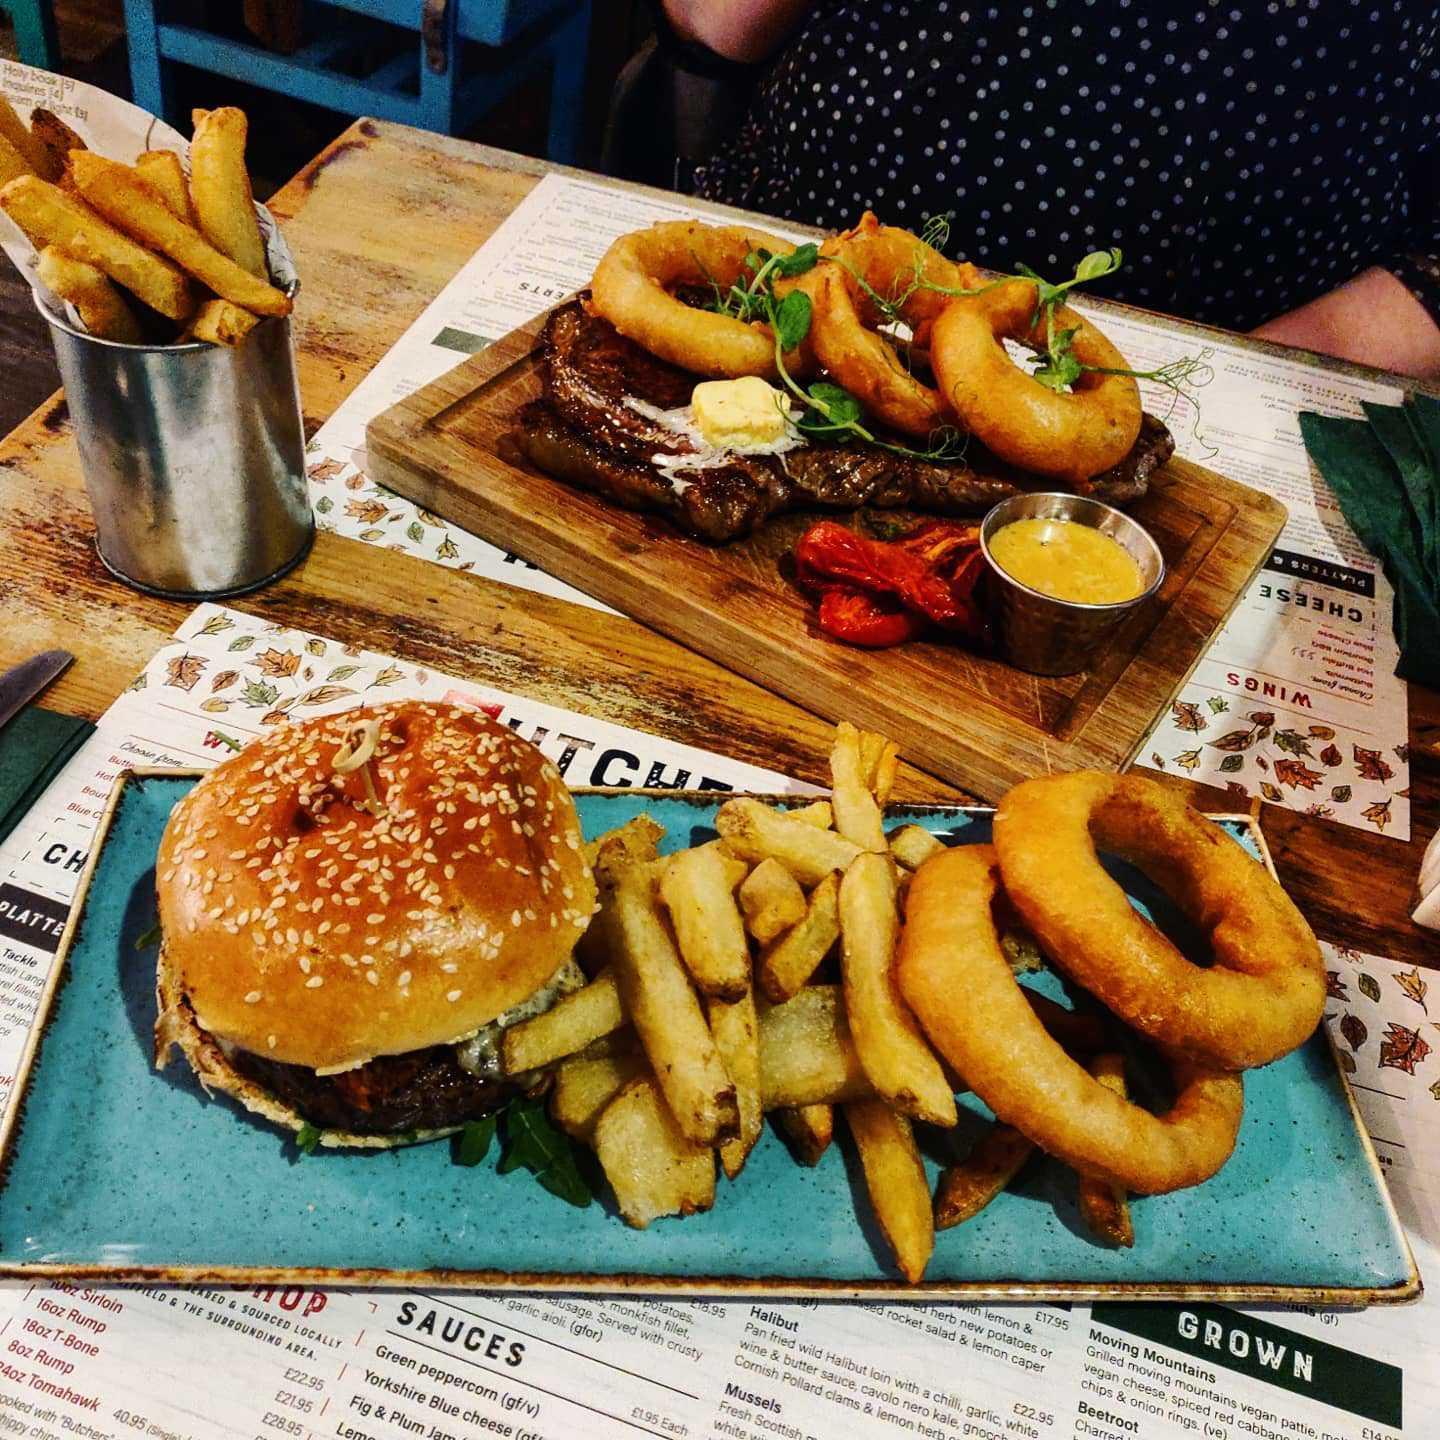 A rump steak served with onion rings and a Porterhouse steak burger from Butcher and Catch